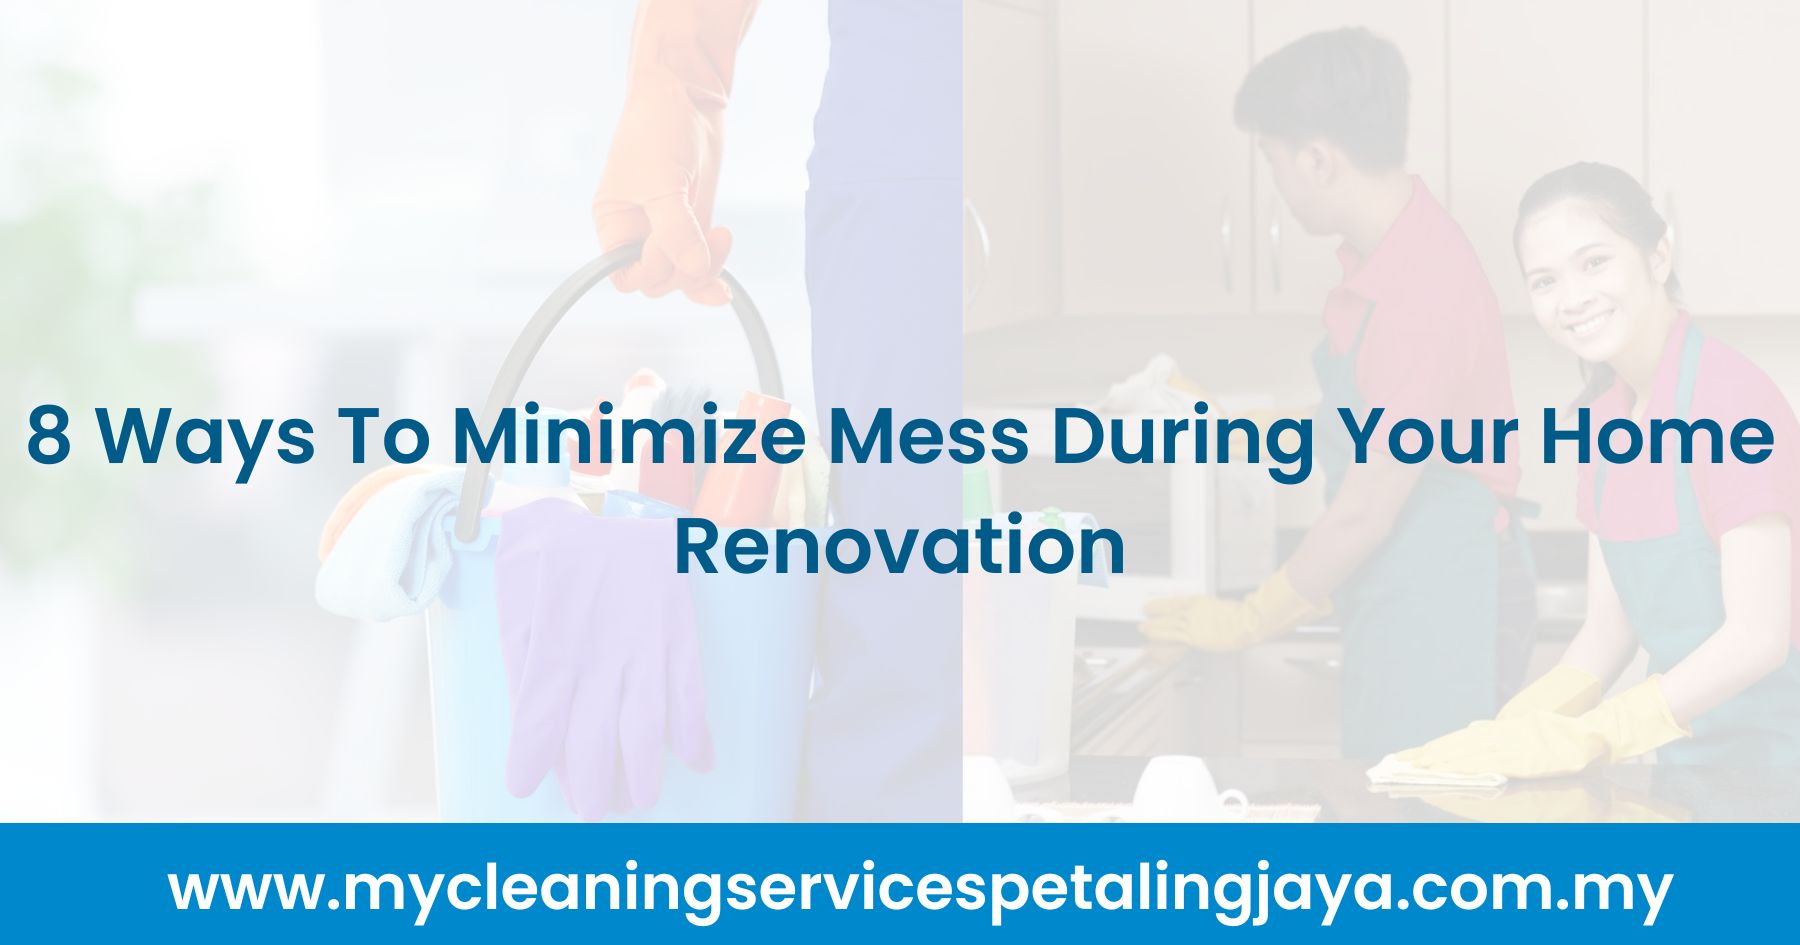 8 Ways To Minimize Mess During Your Home Renovation